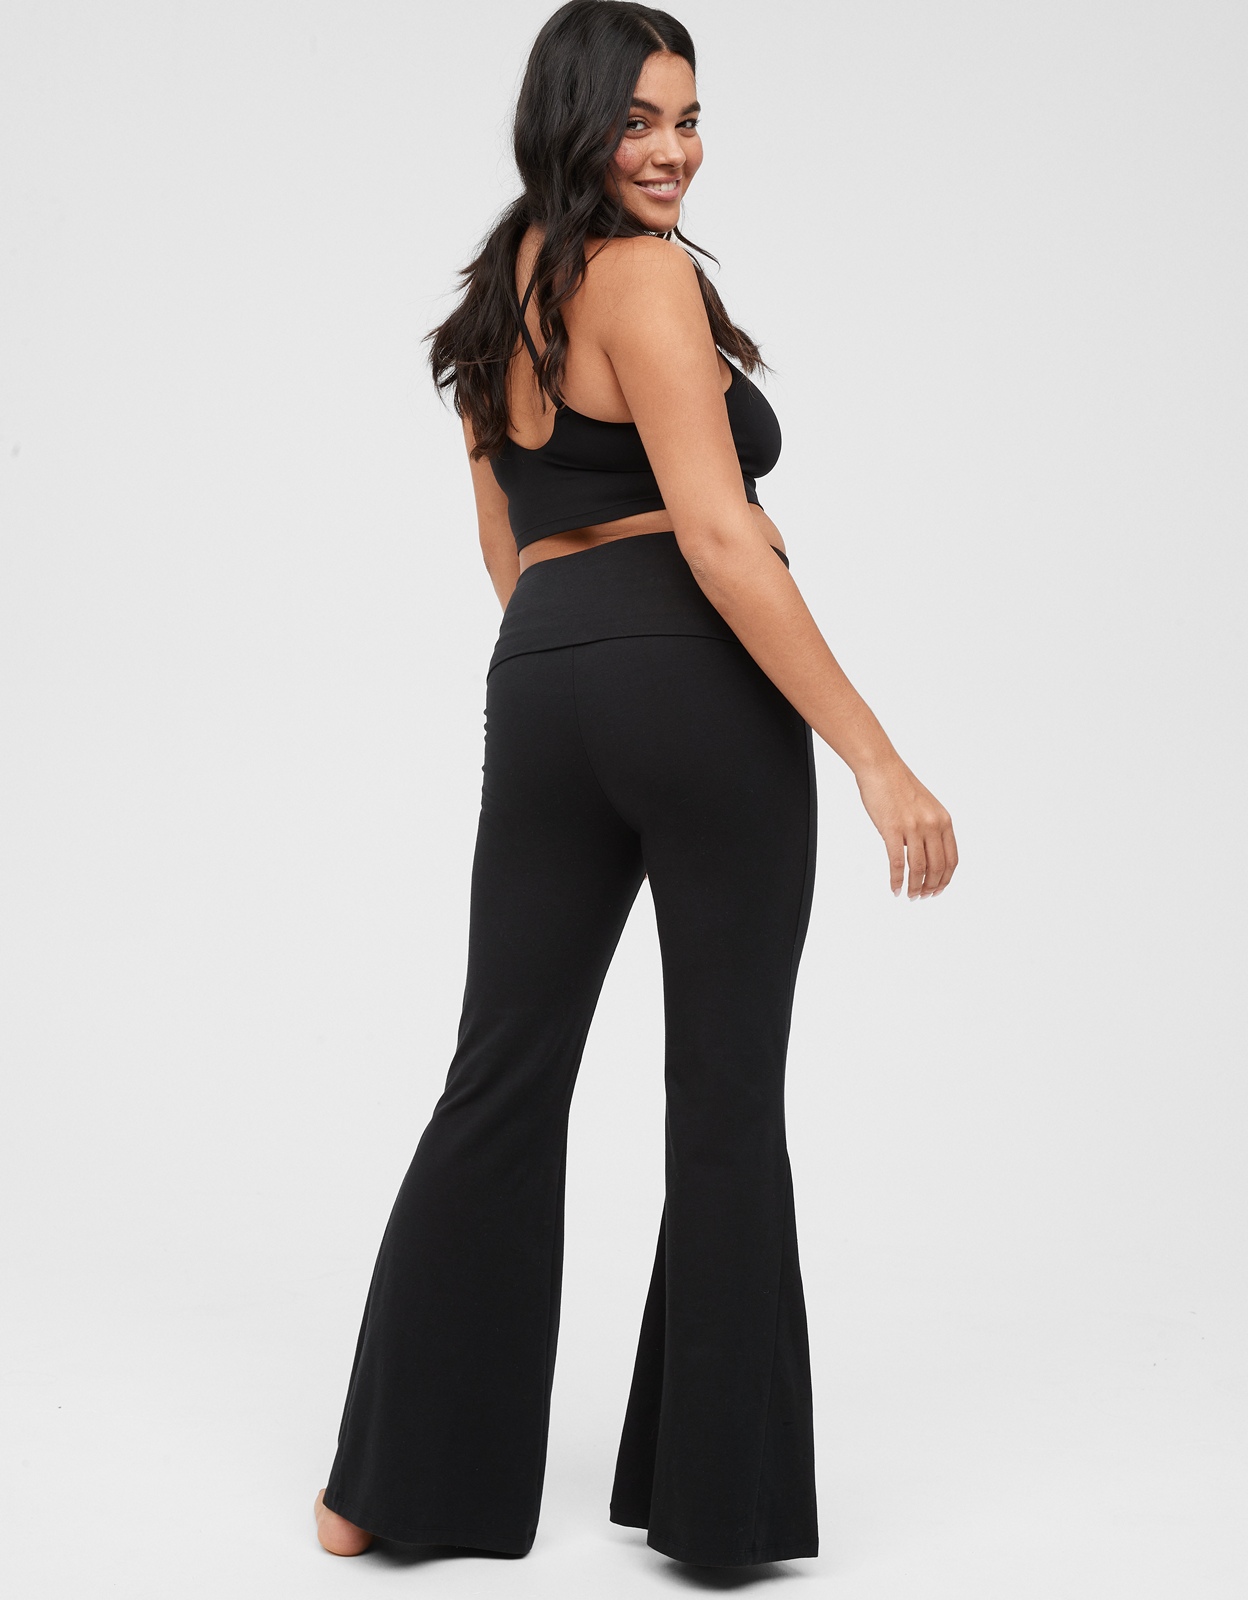 Aerie Flare Leggings Crossover Waist Black Size XS - $30 (44% Off Retail) -  From Courtney